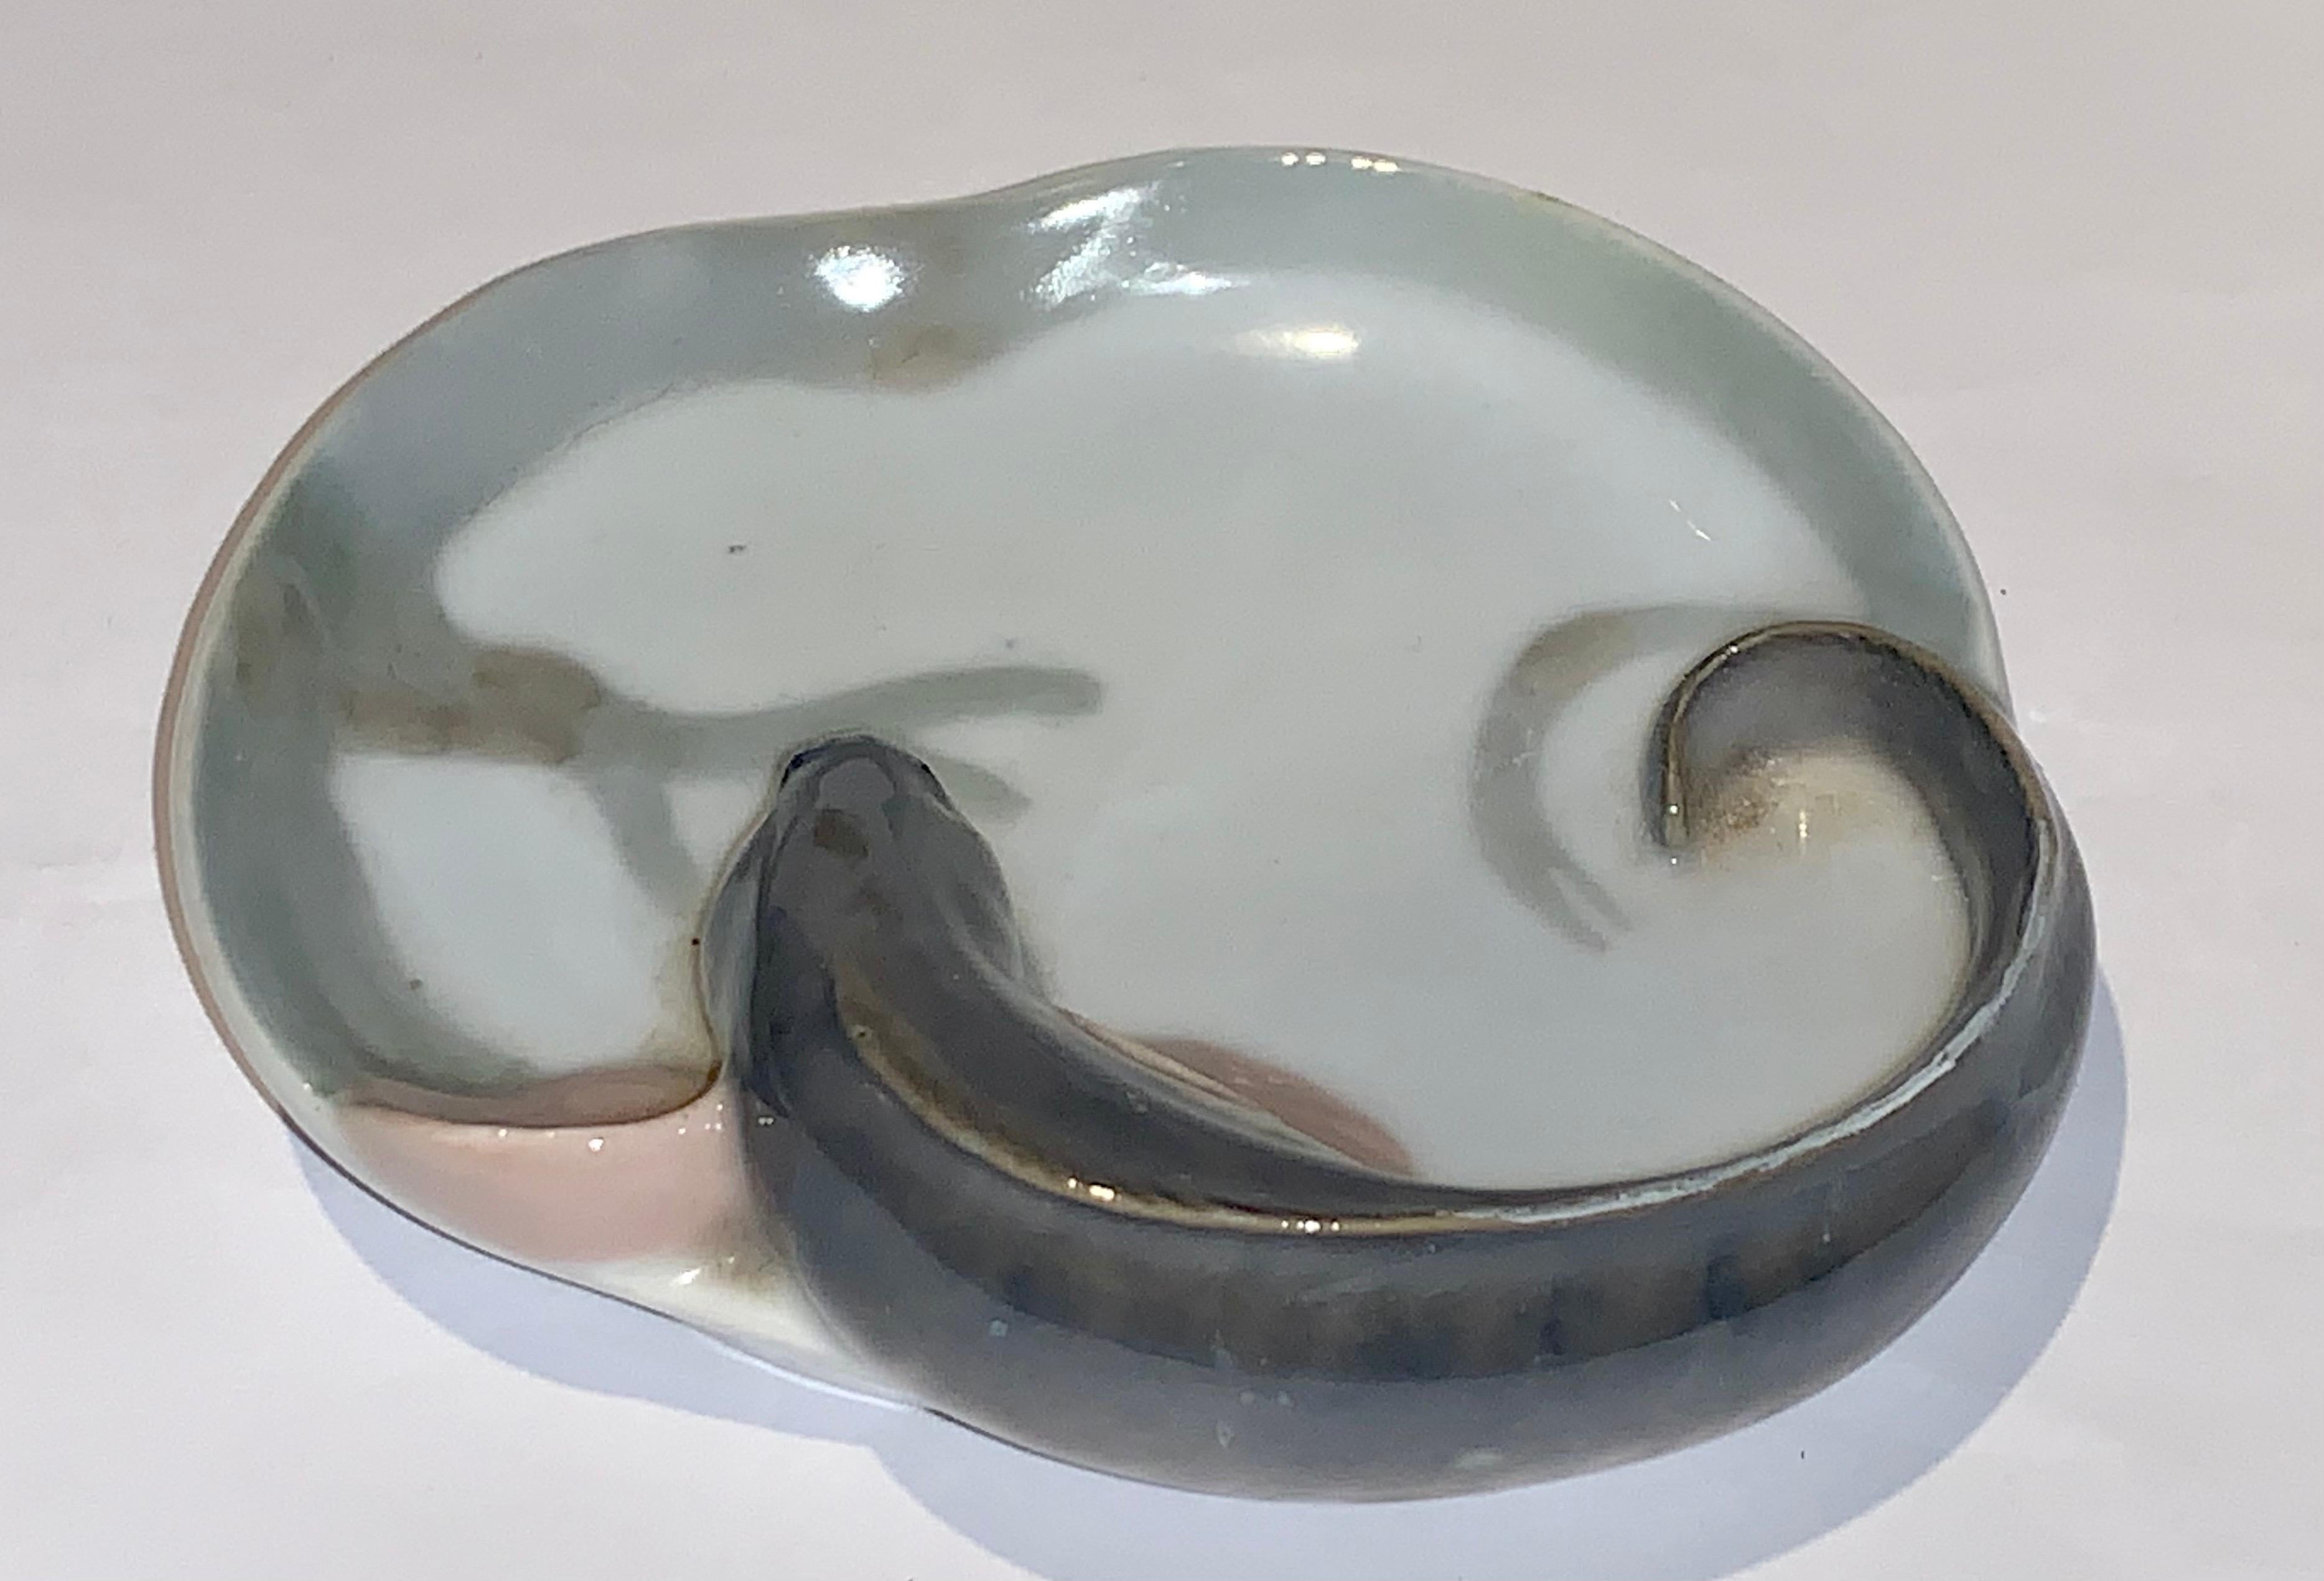 A nice quality Royal Copenhagen tray with an Eel fish decoration.
This is painted in lovely subtle tones with exceptional moulding and made circa 1920. Marked on the base Royal Copenhagen and numbered 1139. Presented in very good condition and